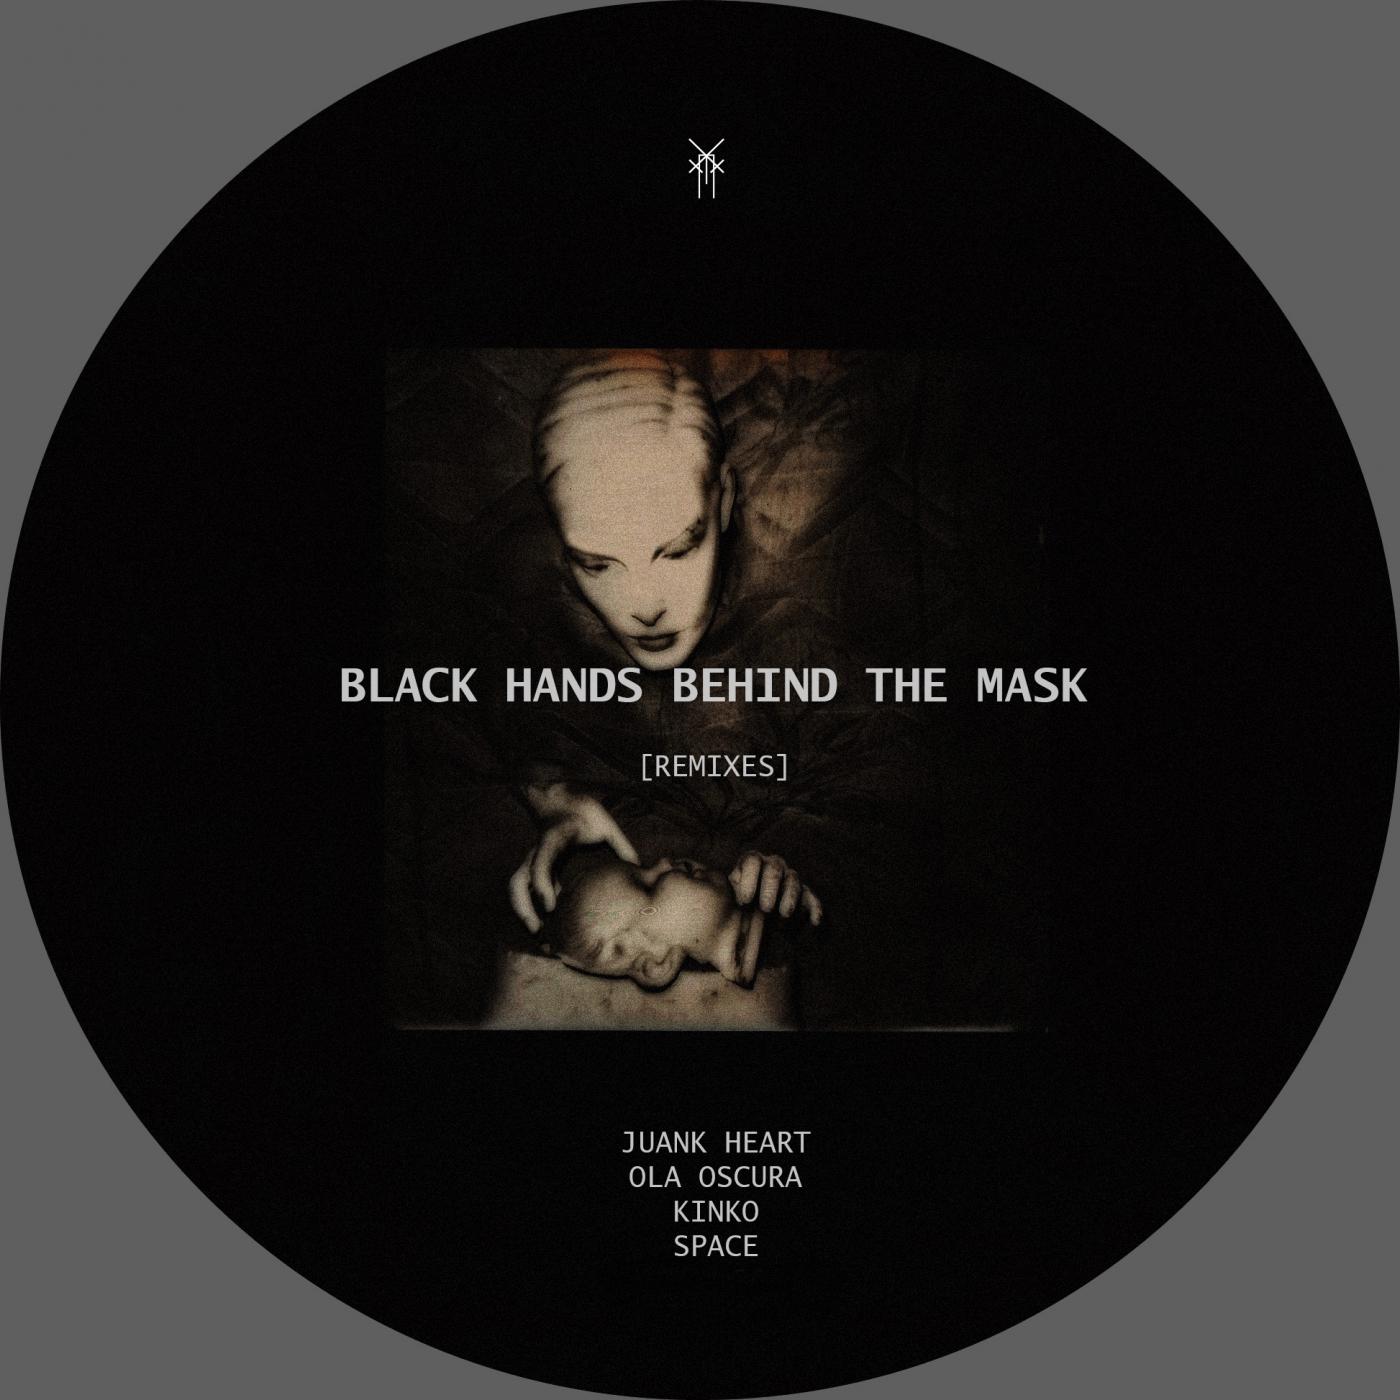 Black Hands Behind The Mask (Ola Oscura Remix)